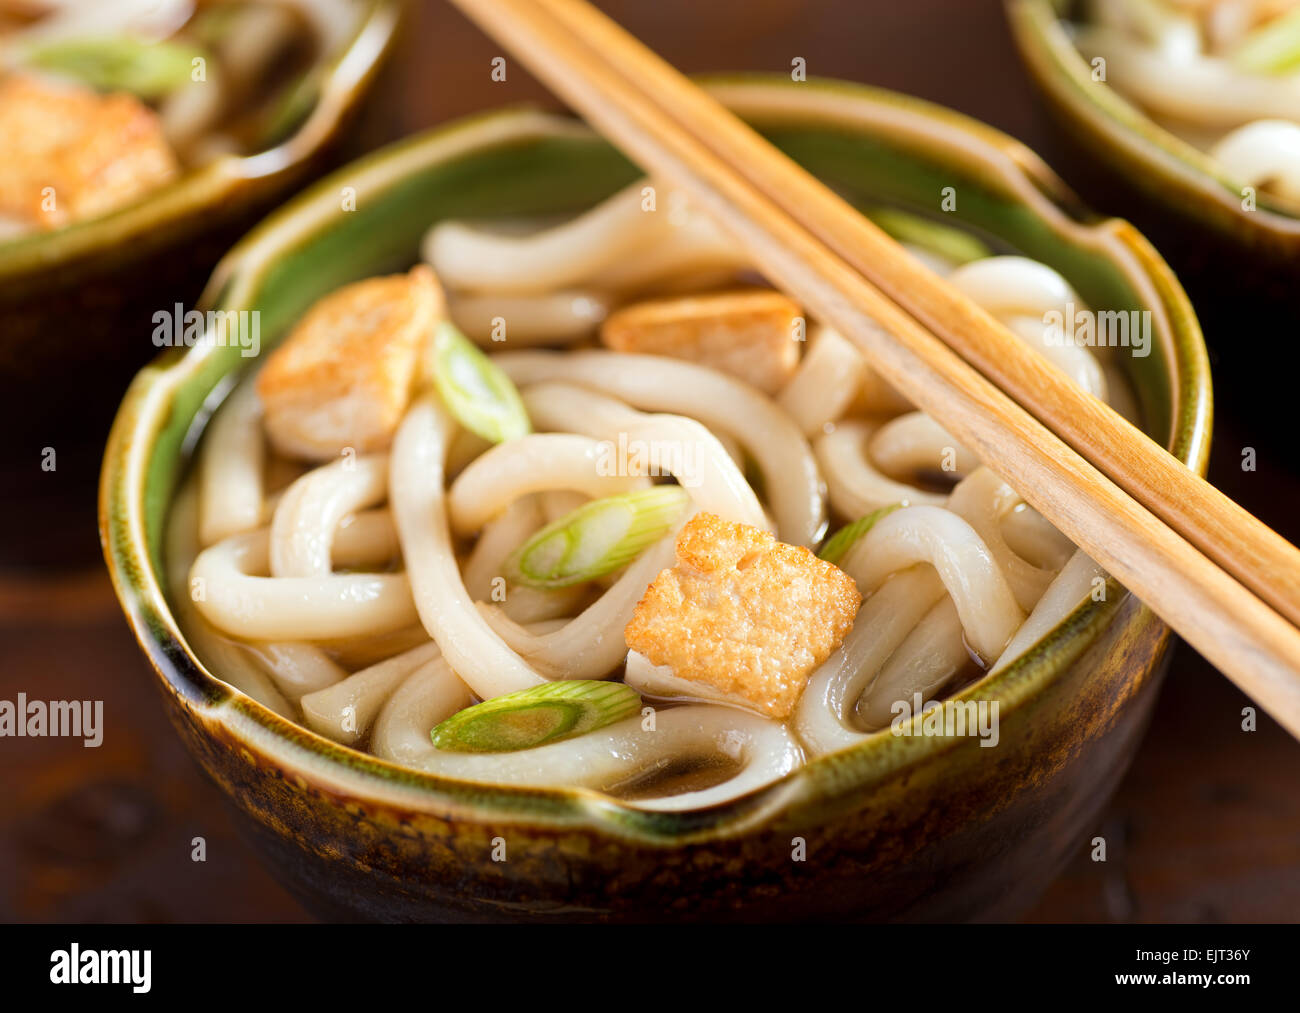 A delicious udon noodle bowl with tofu and green onion. Stock Photo